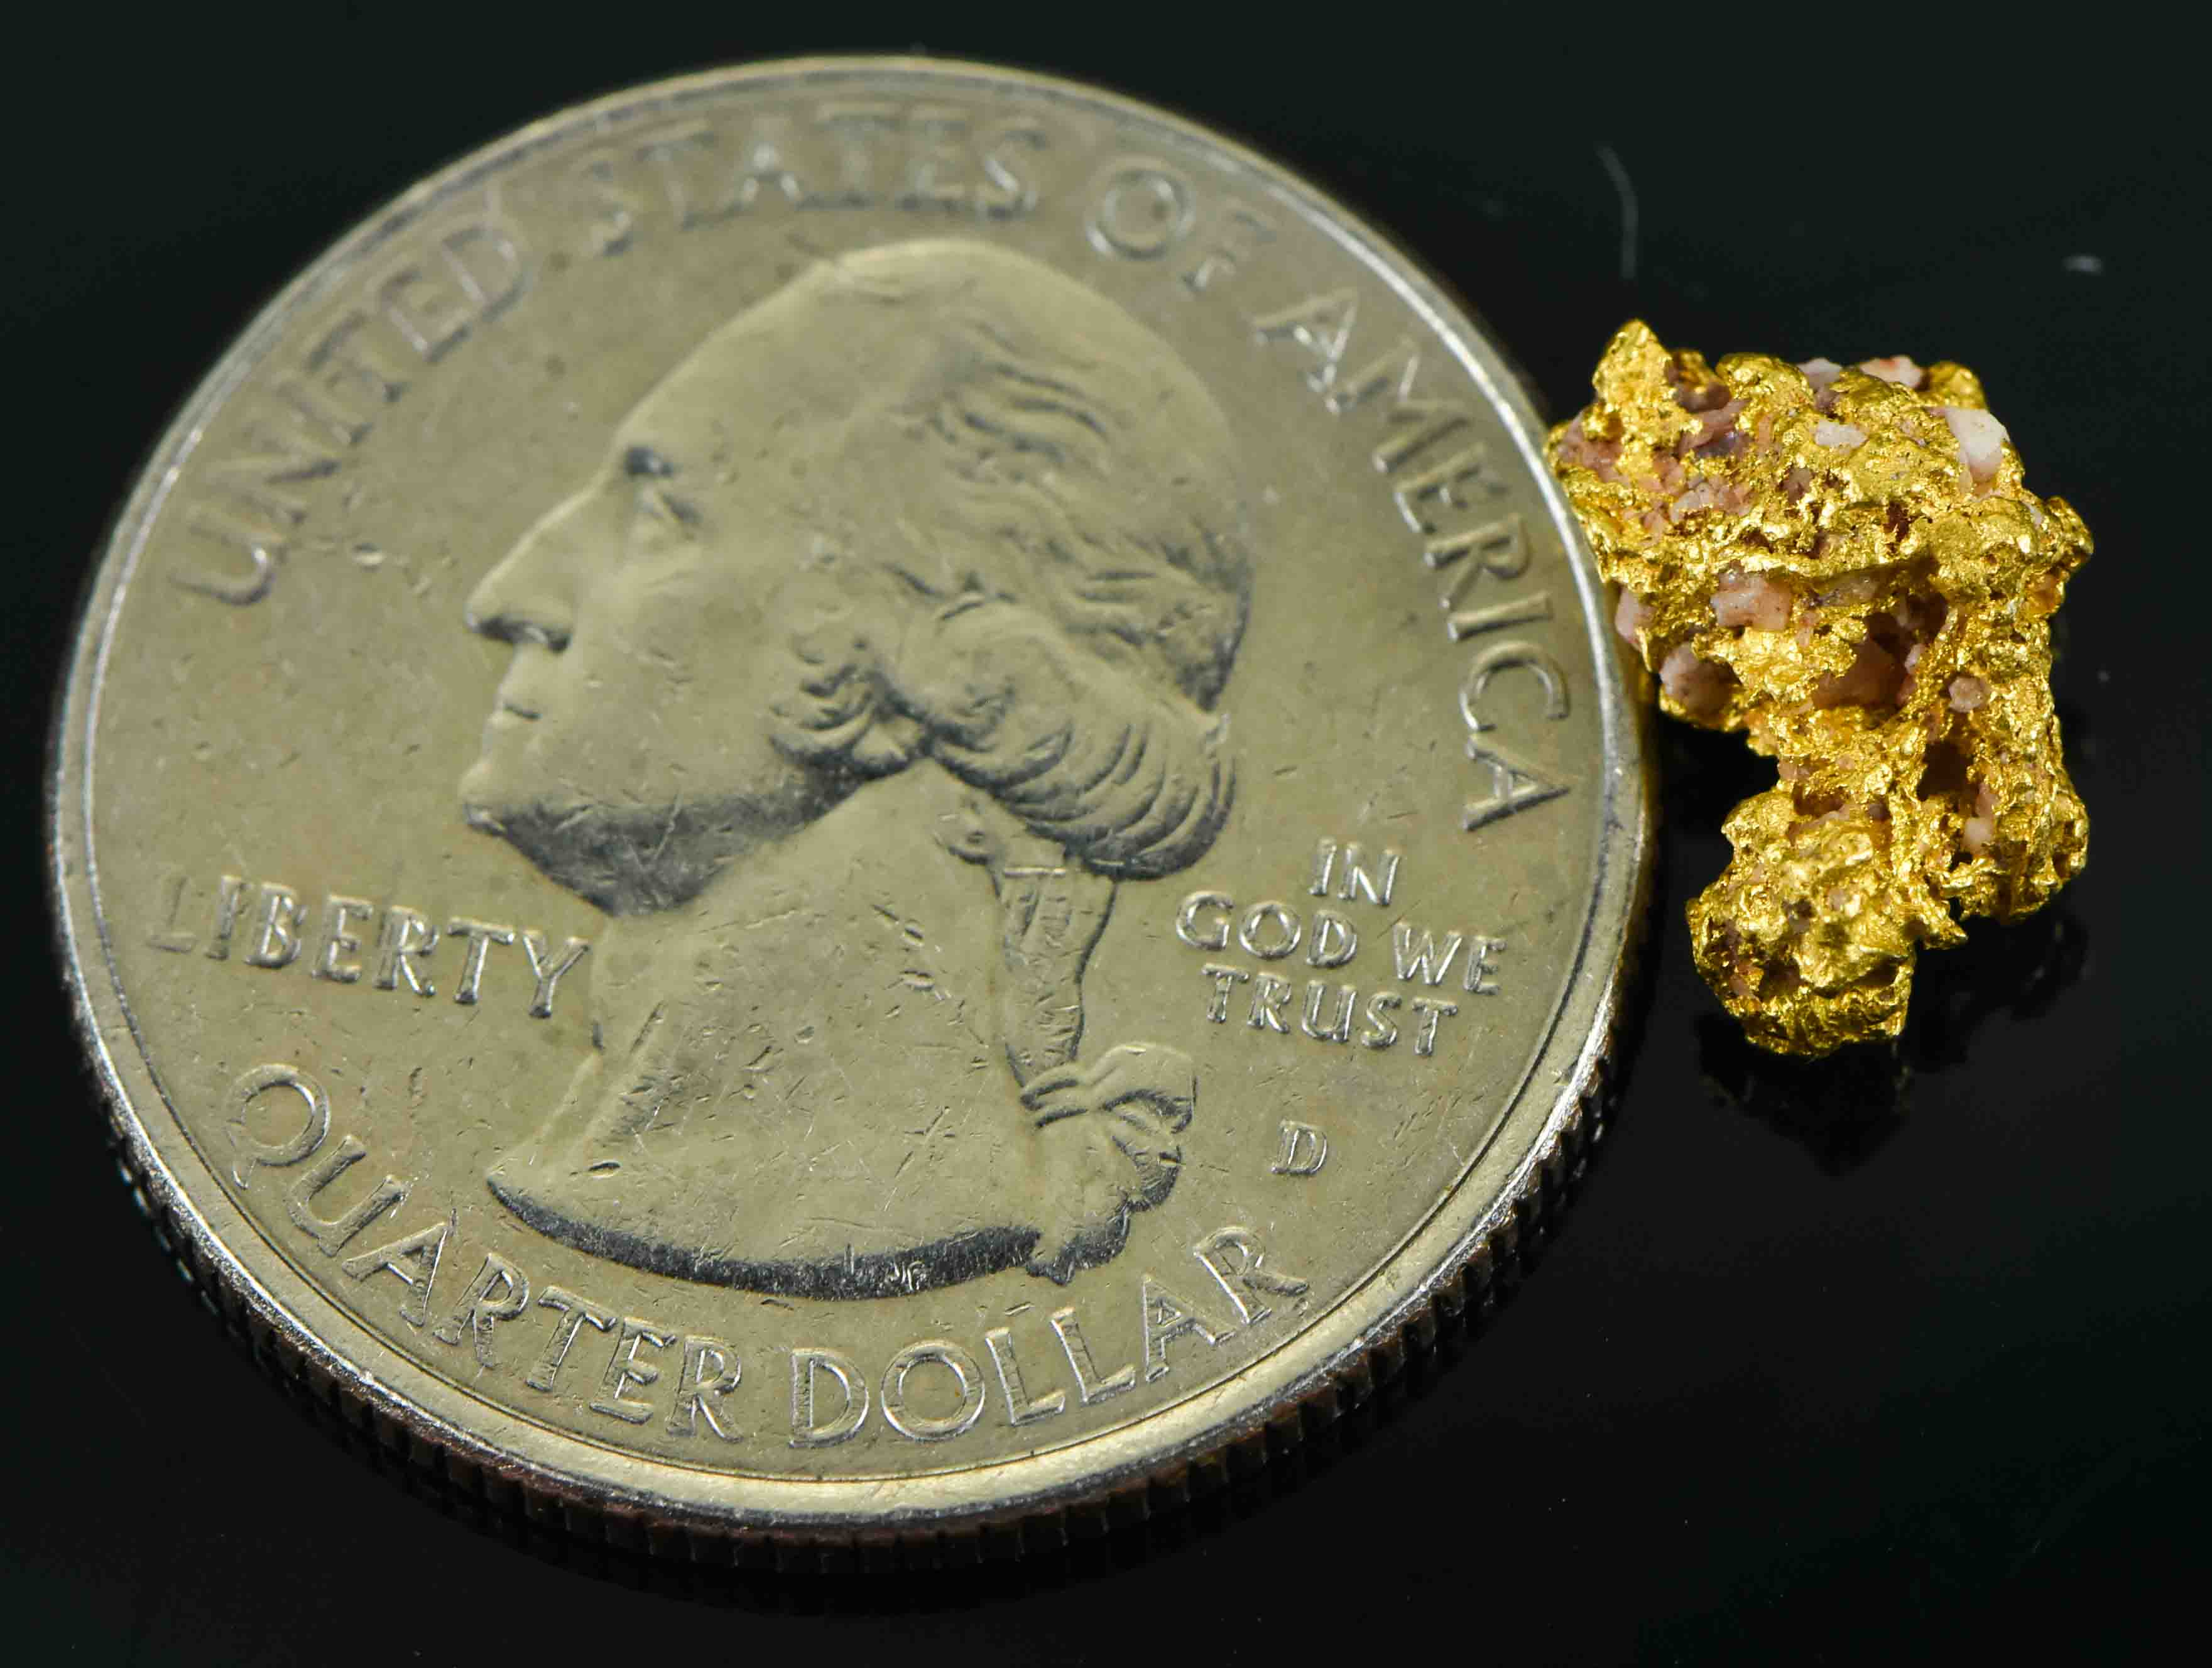 #34 Australian Natural Gold Nugget With Quartz Weighs 1.42 Grams.